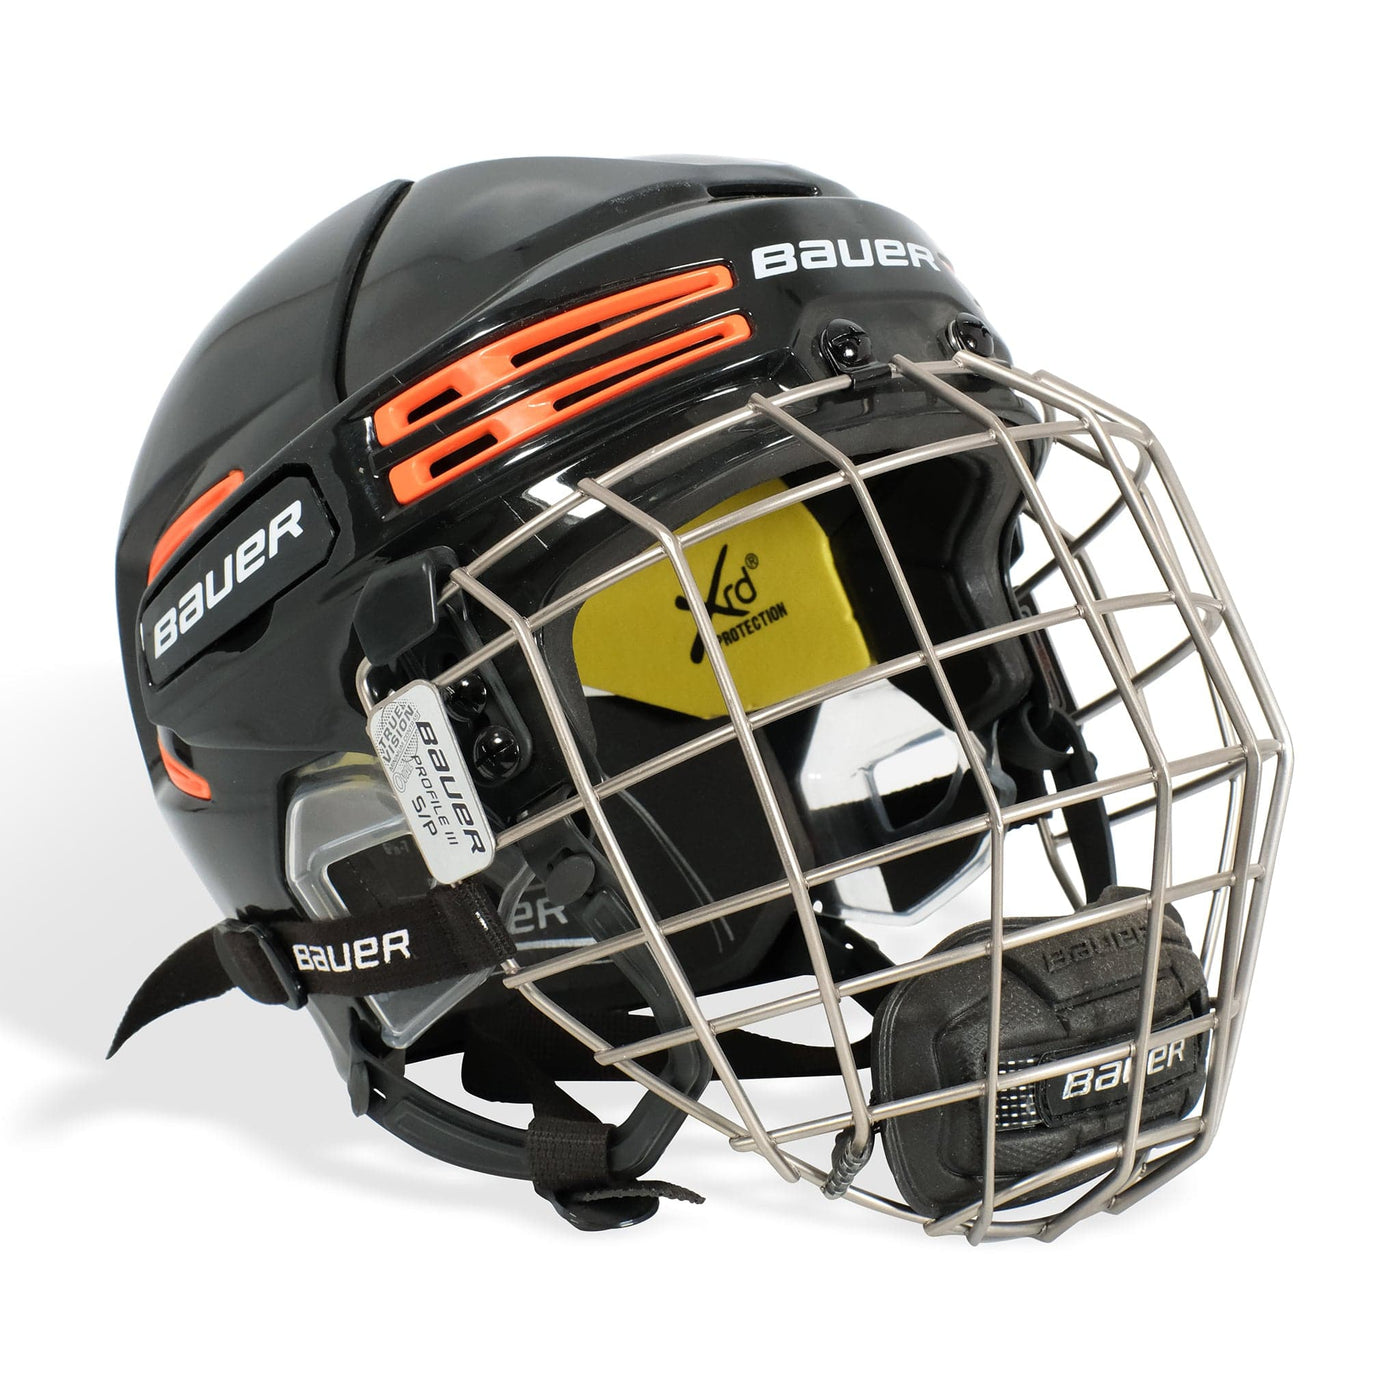 Bauer RE-AKT 75 Hockey Helmet / Cage Combo - The Hockey Shop Source For Sports